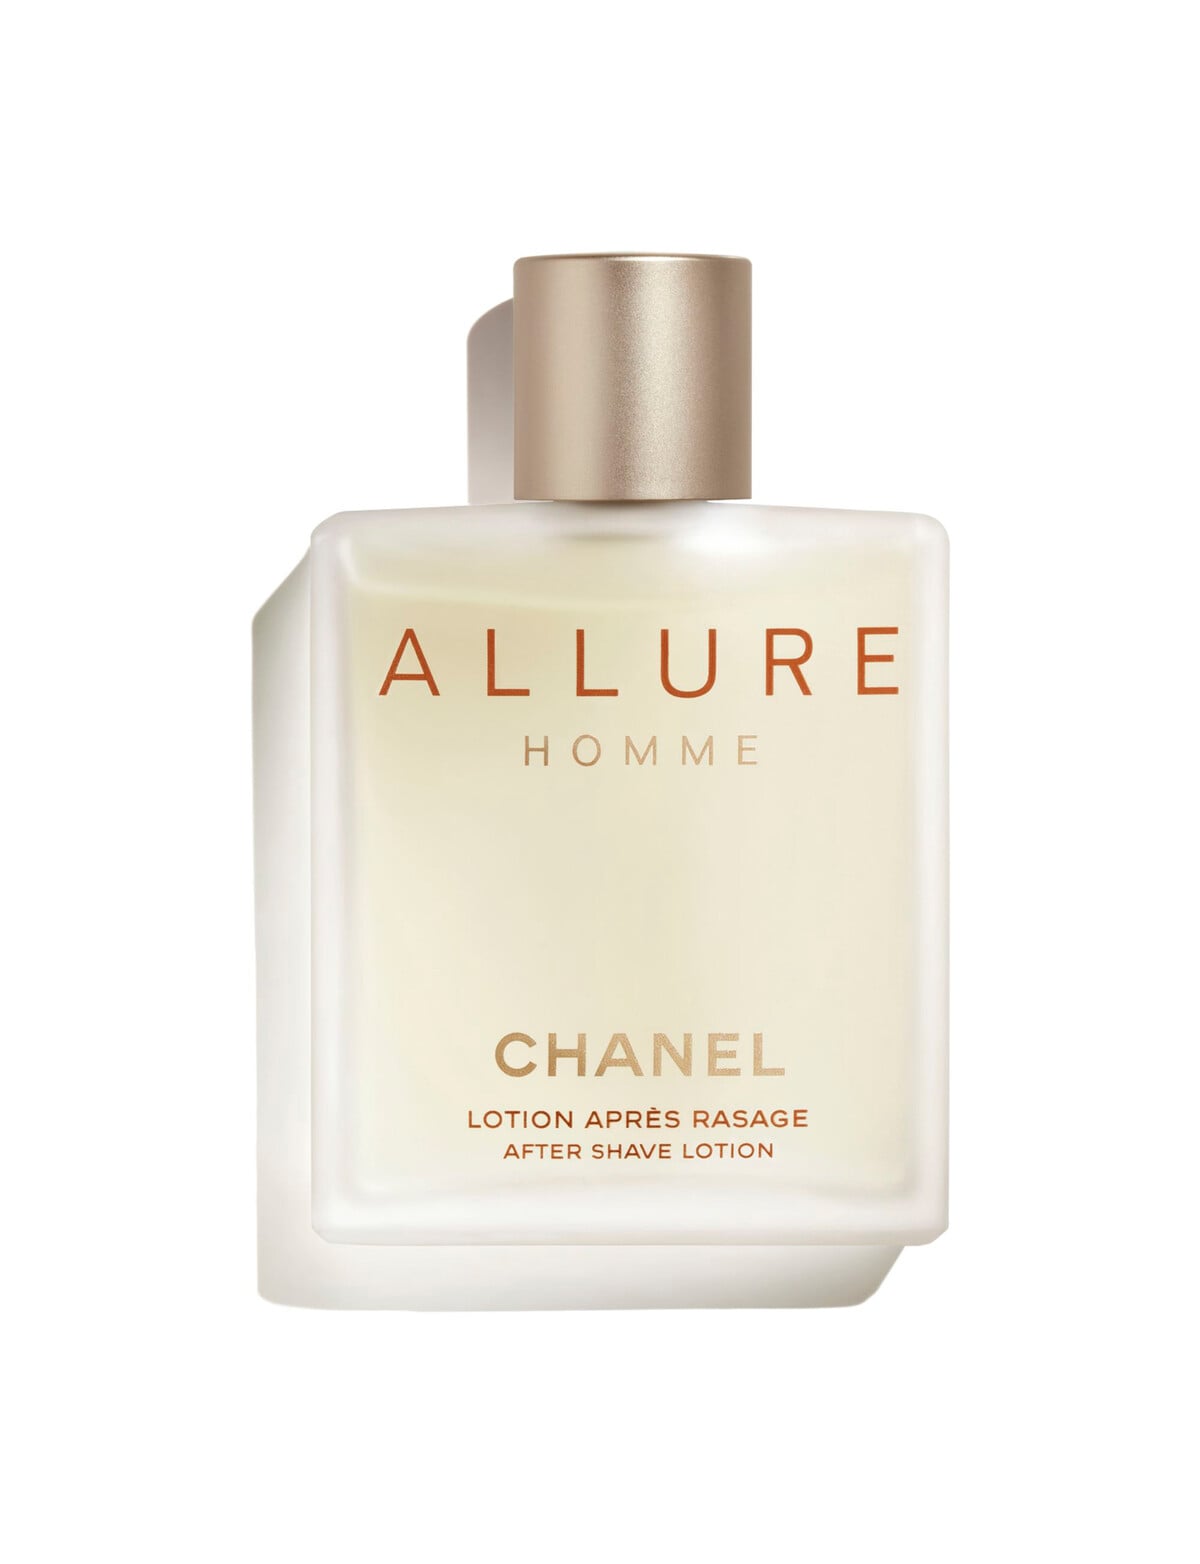 CHANEL ALLURE HOMME After Shave Lotion 100ml - ALLURE HOMME